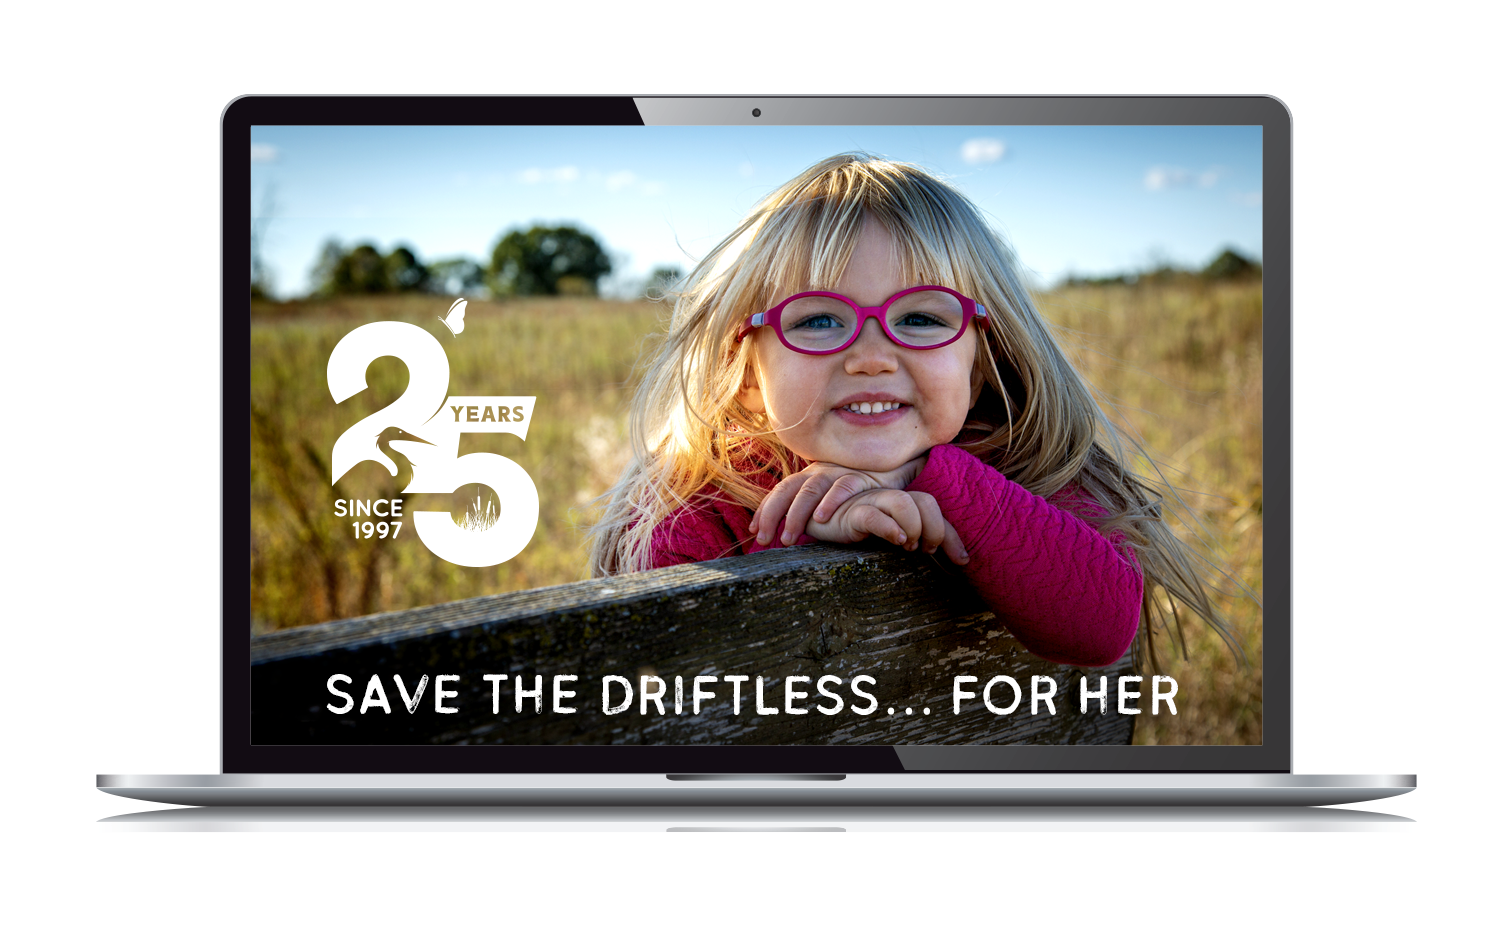 Mississippi Valley Conservancy 25-year anniversary campaign web page with smiling little girl in pink displayed on laptop screen